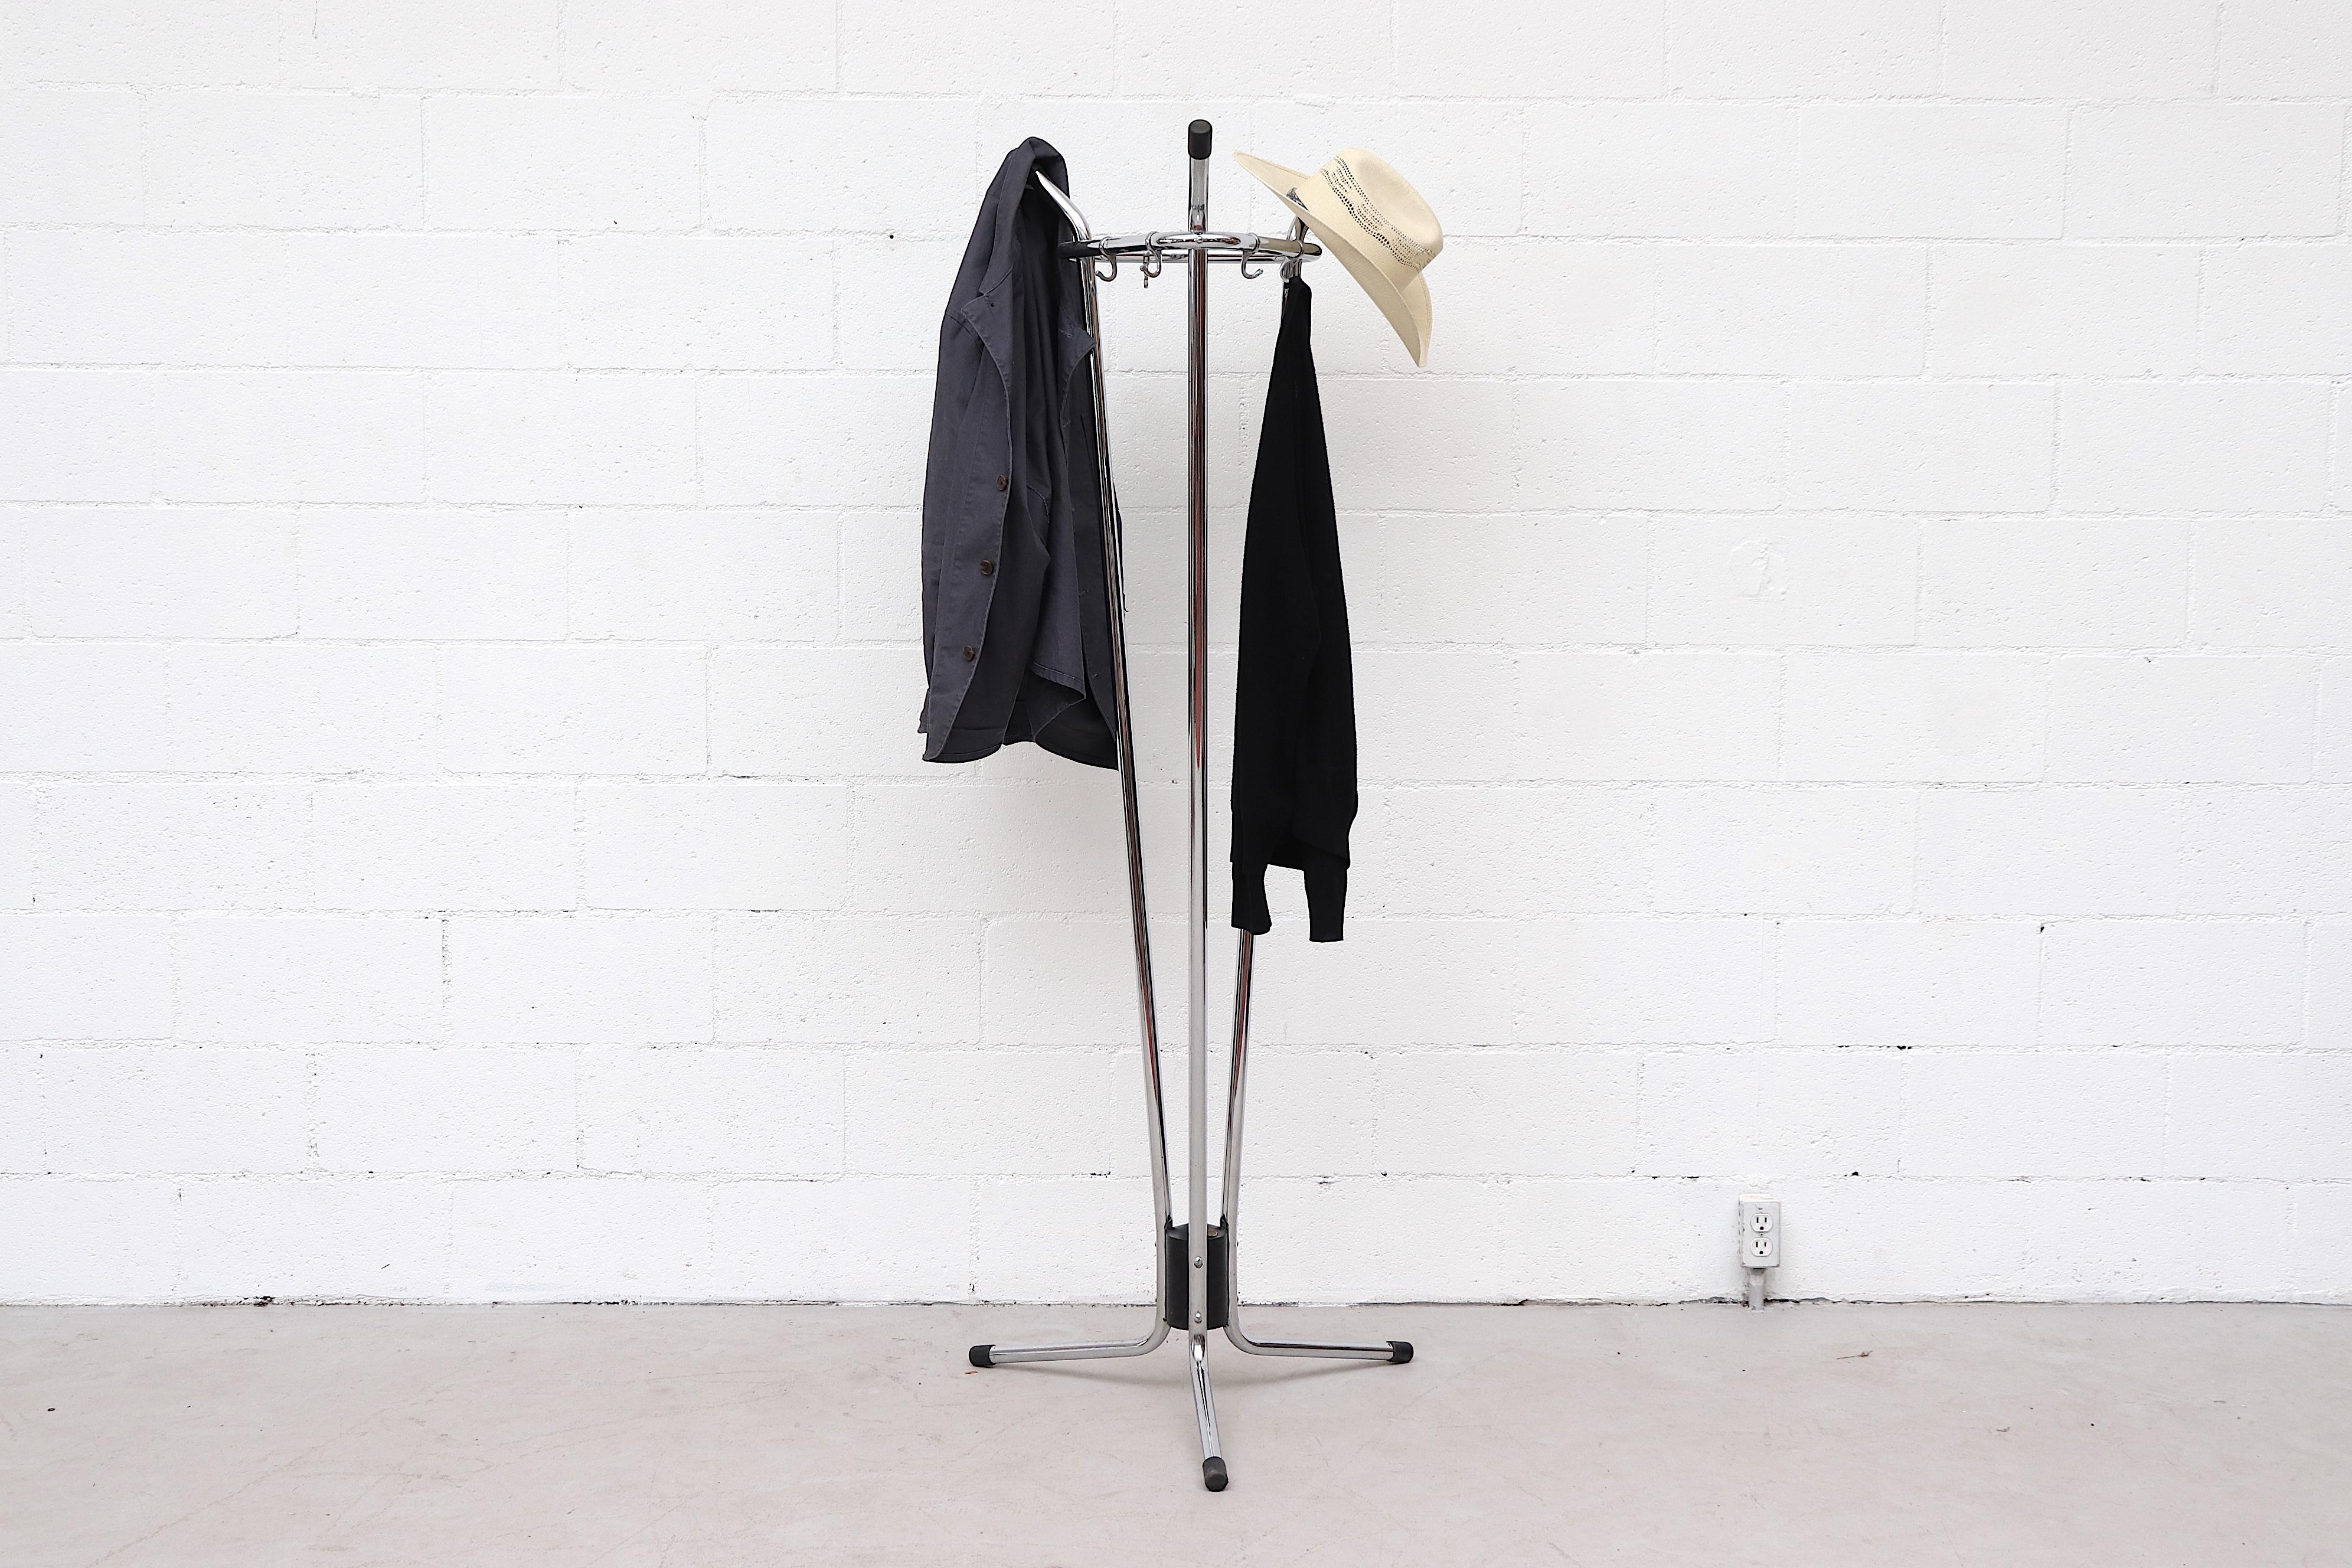 Impressive Tubax (attributed) industrial coat rack with three chrome tube arms creating a triangular freestanding coat rack with 6 hooks and center weight. In original condition with minimal wear and black rubber foot caps.